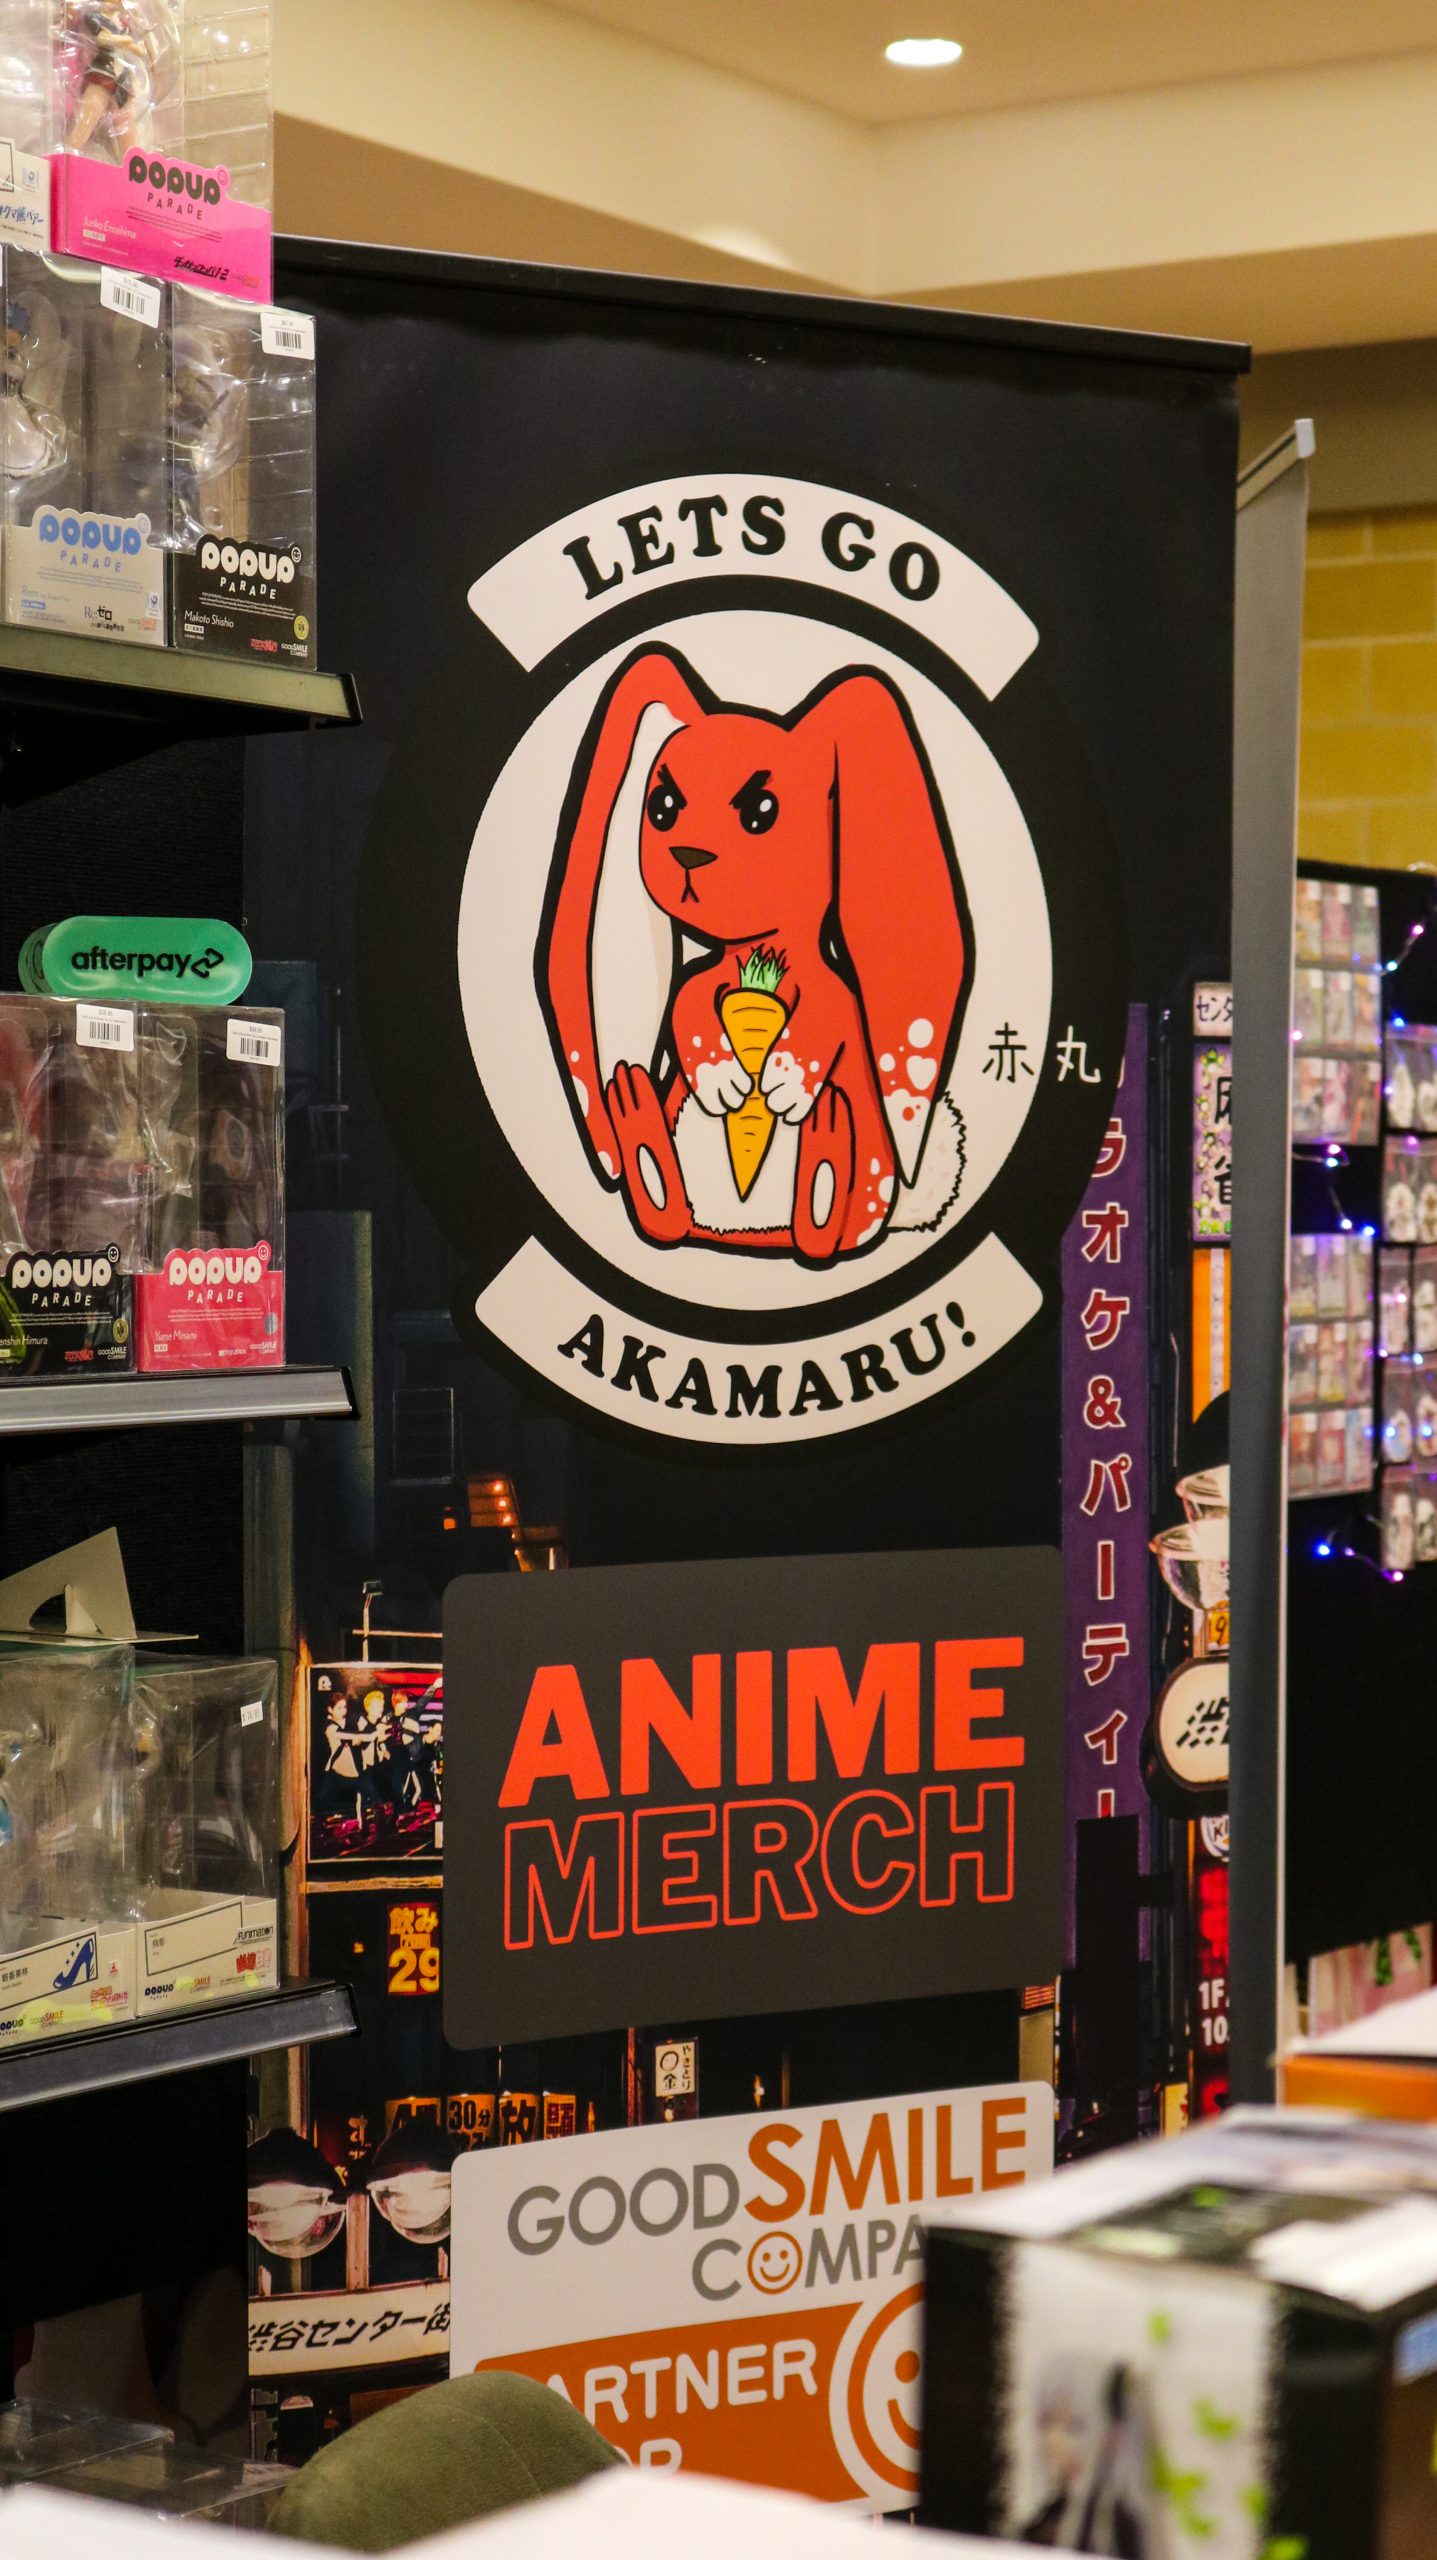 Let's Go Akamaru, a Logan business selling anime products in Beenleigh.